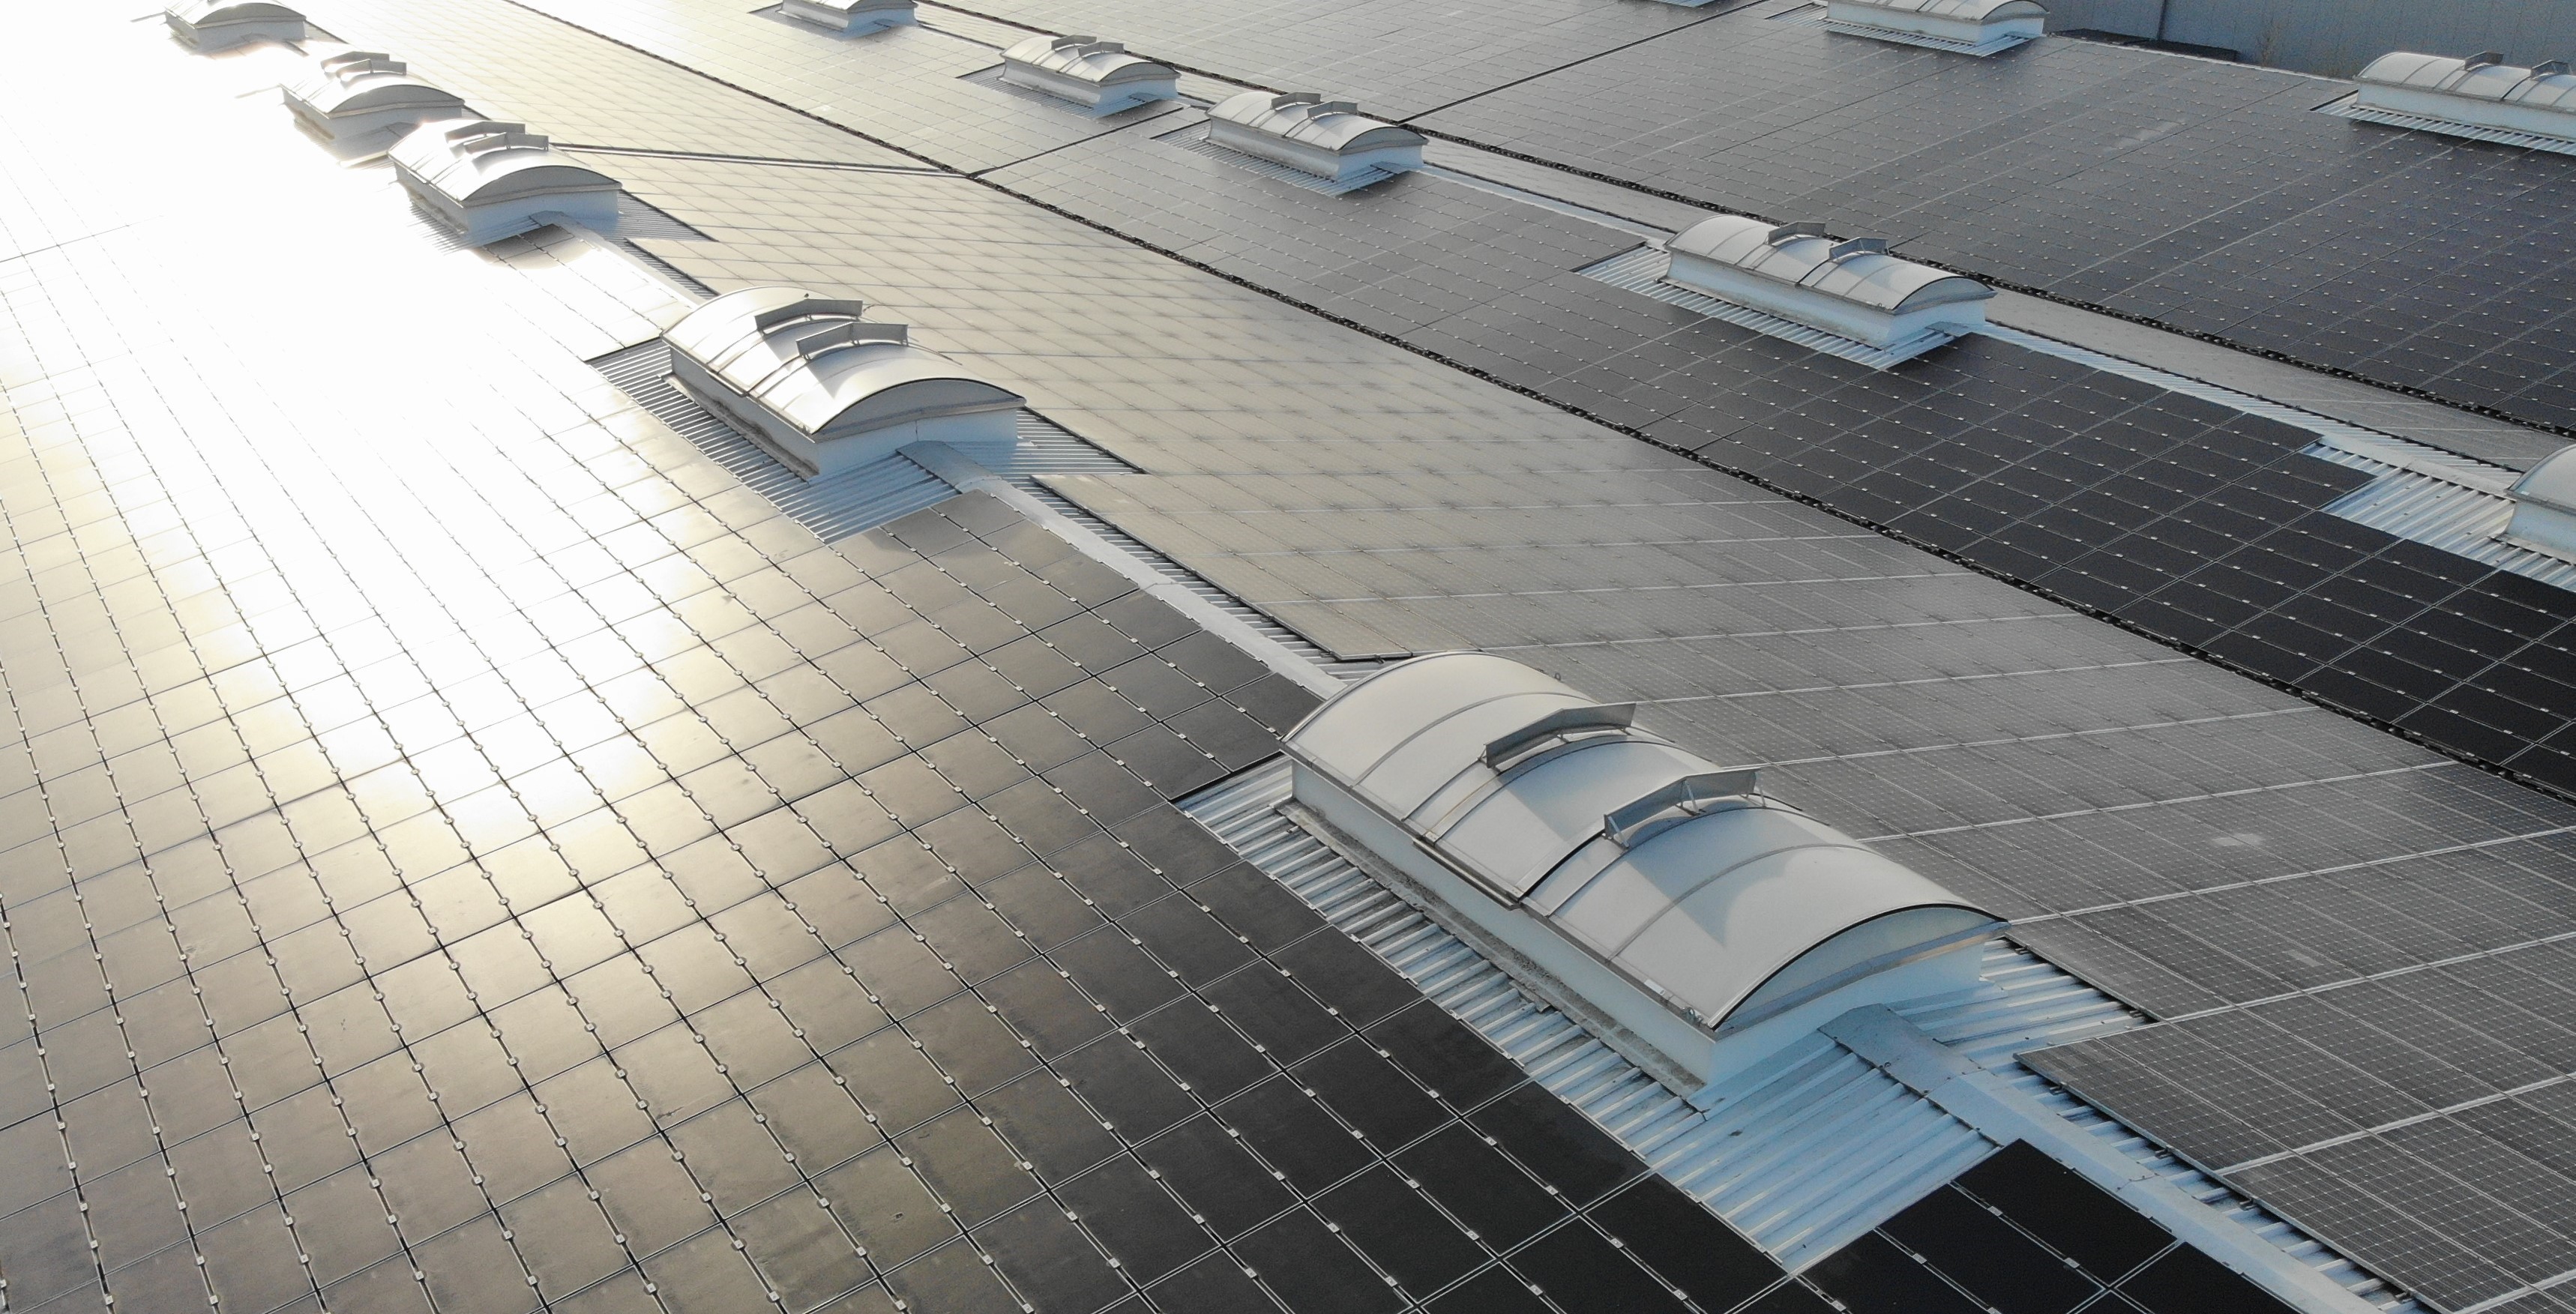 30.08.2022 - SolarKapital acquires six additional rooftop PV plants in Southern Germany 